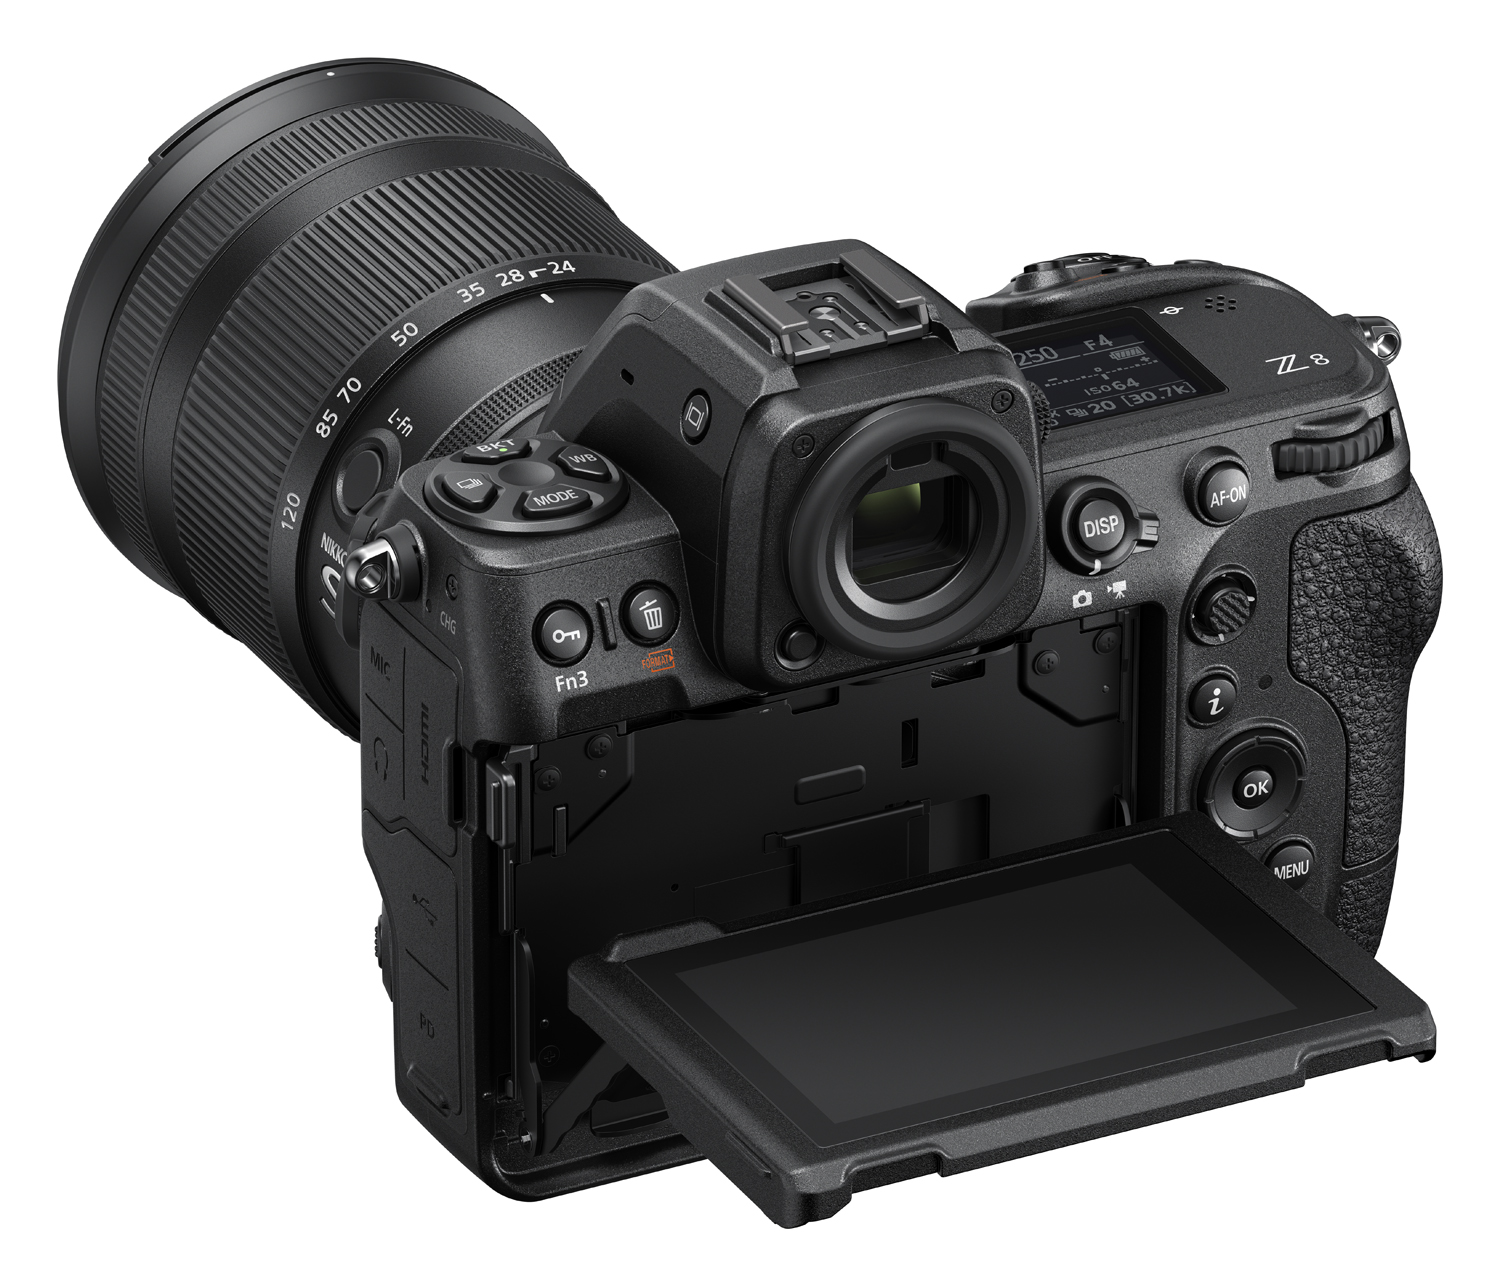 Nikon Z8 with tilted rear monitor.